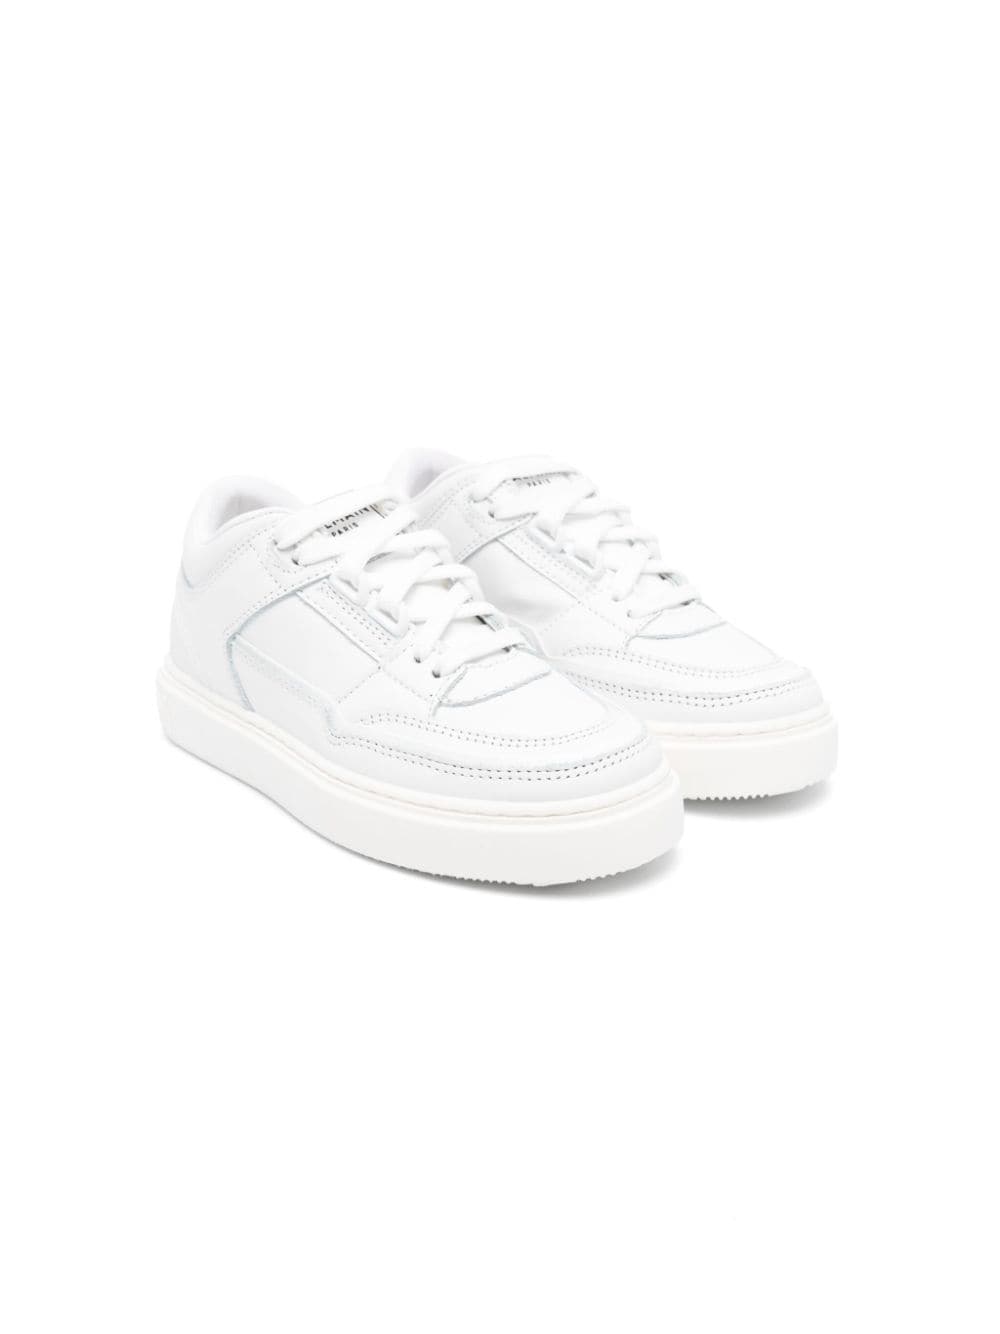 Balmain Kids' B-court Leather Sneakers In White